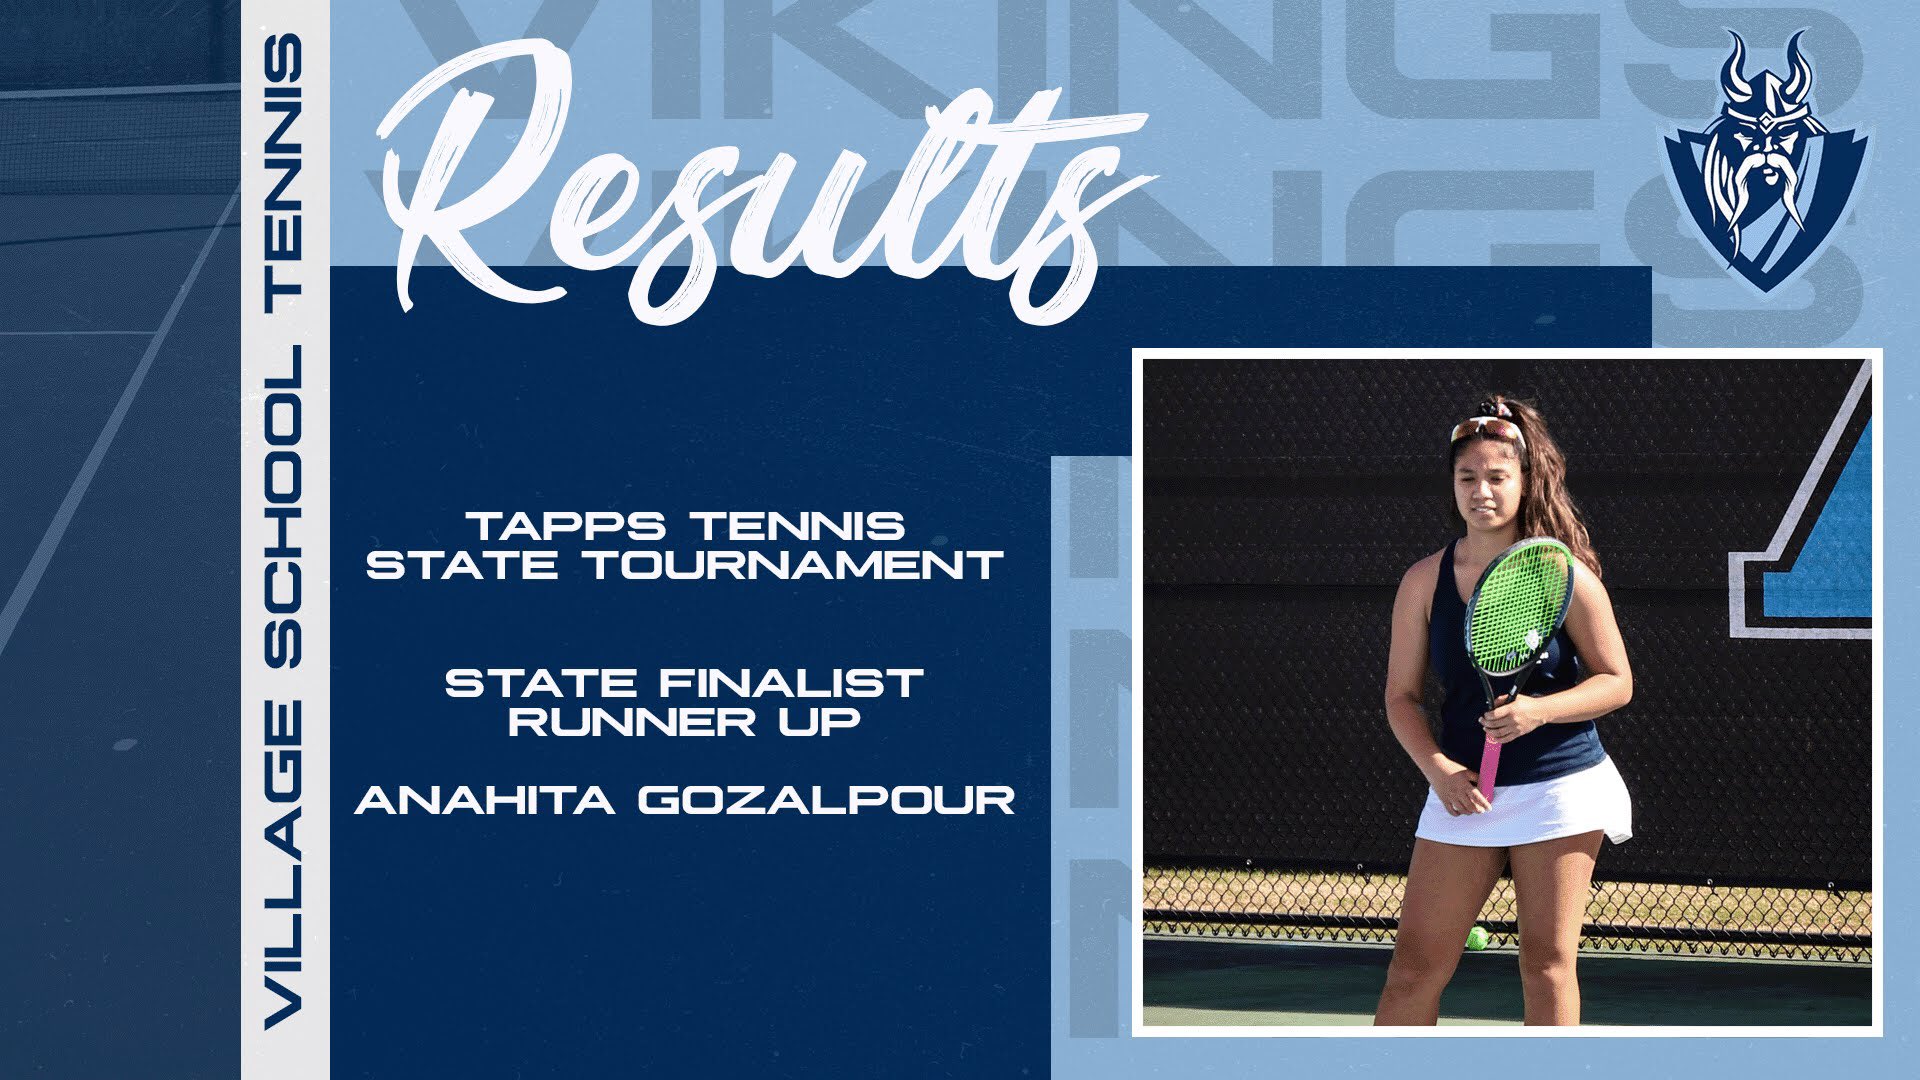 State Tournament results